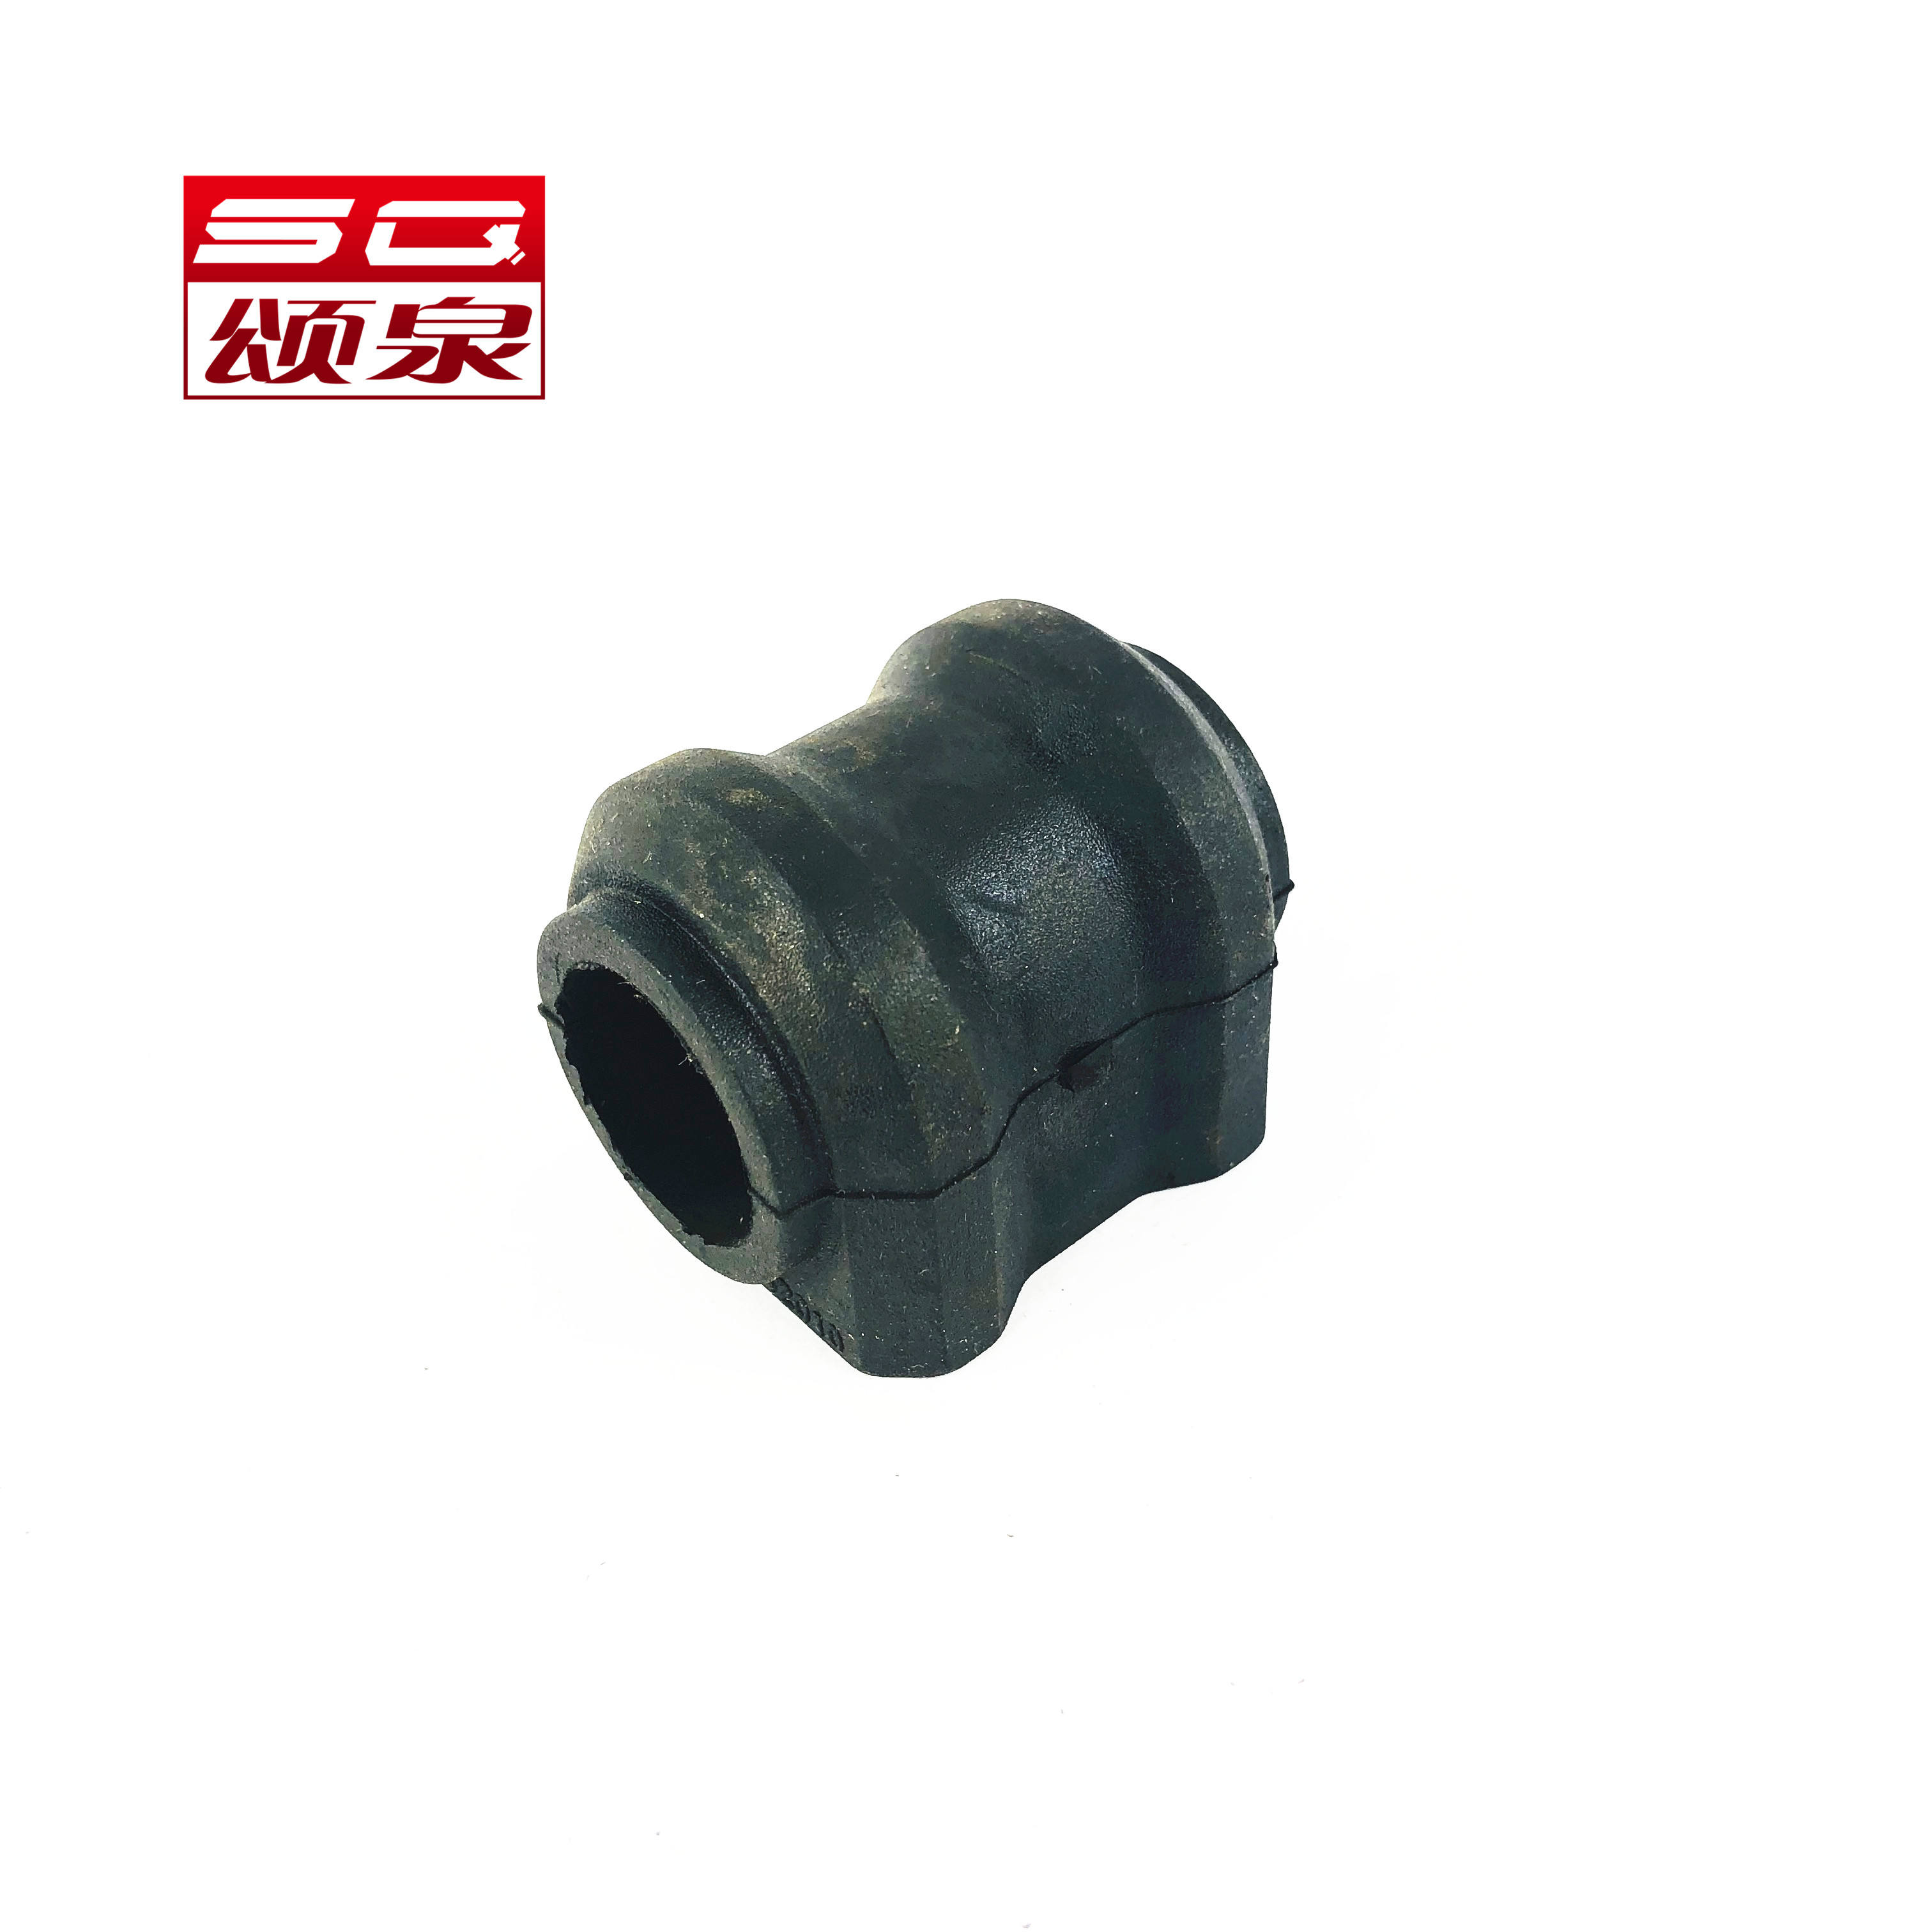 BUSHING FACTORY 48818-42010 48818-0R010 Stabilizer Bushing for TOYOTA High Quality Rubber